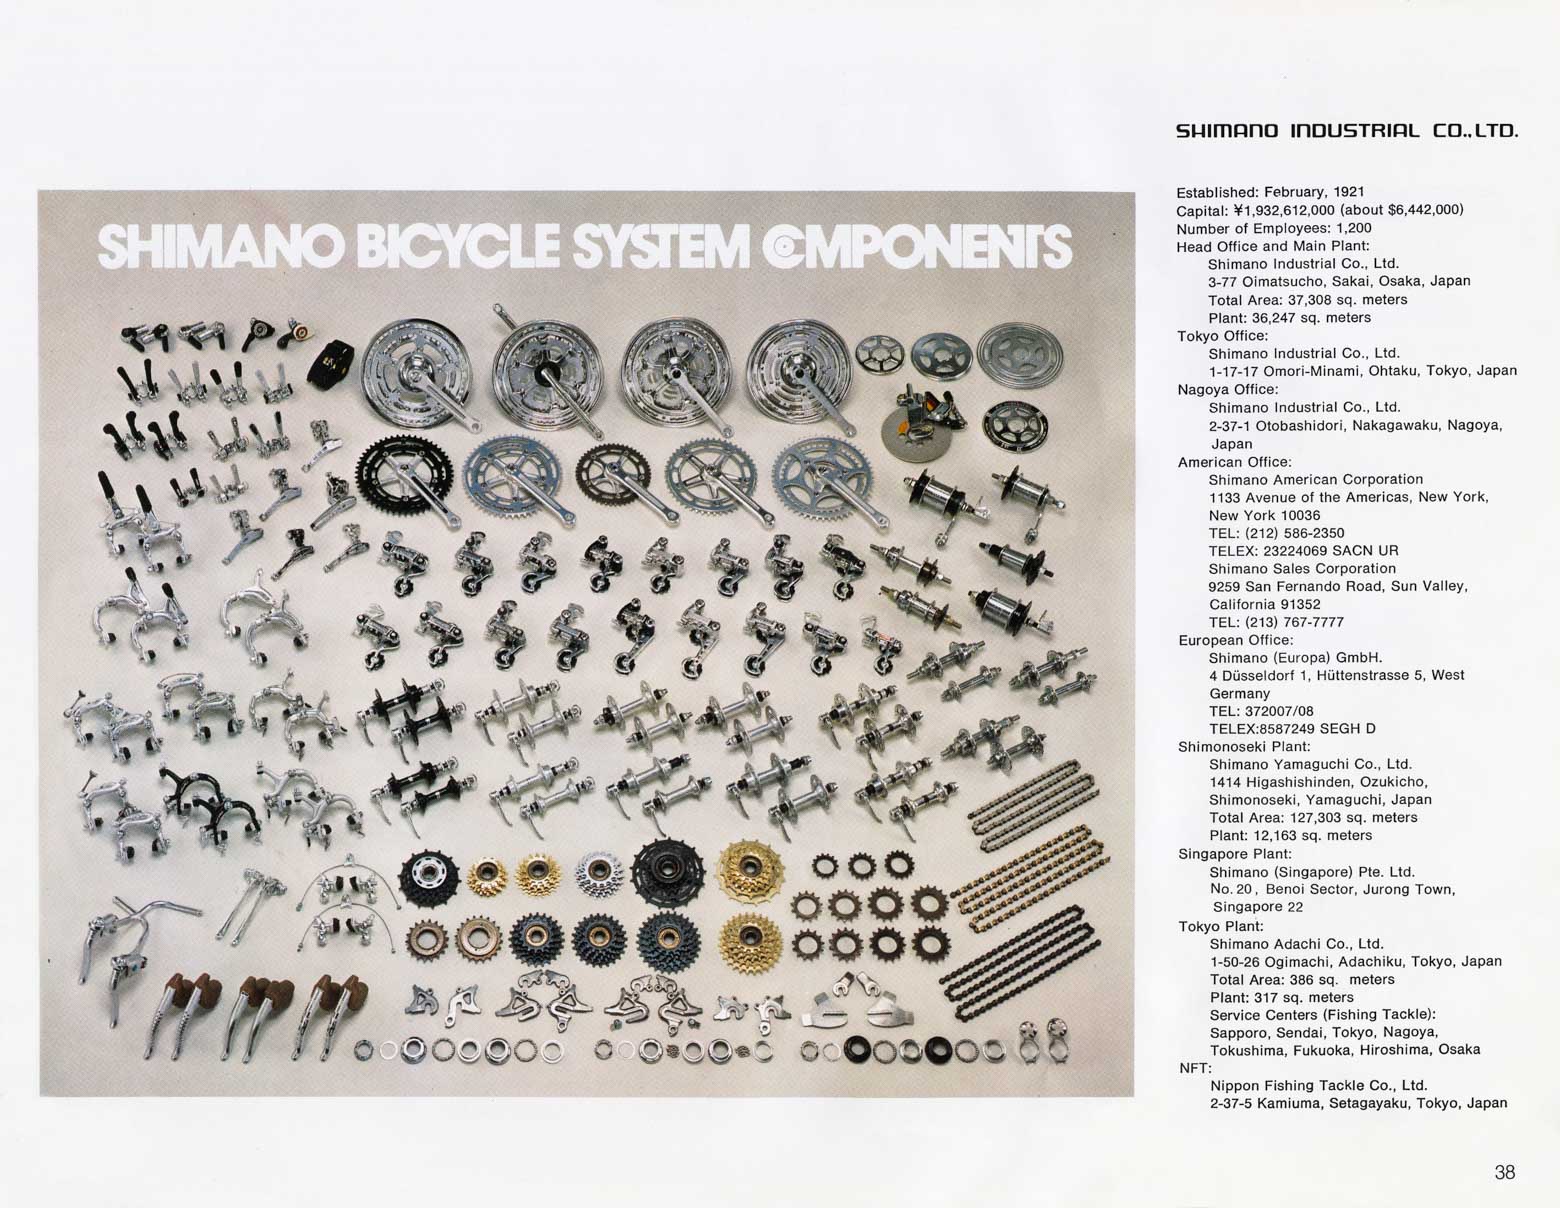 Shimano Bicycle System Components (1977) page 38 main image